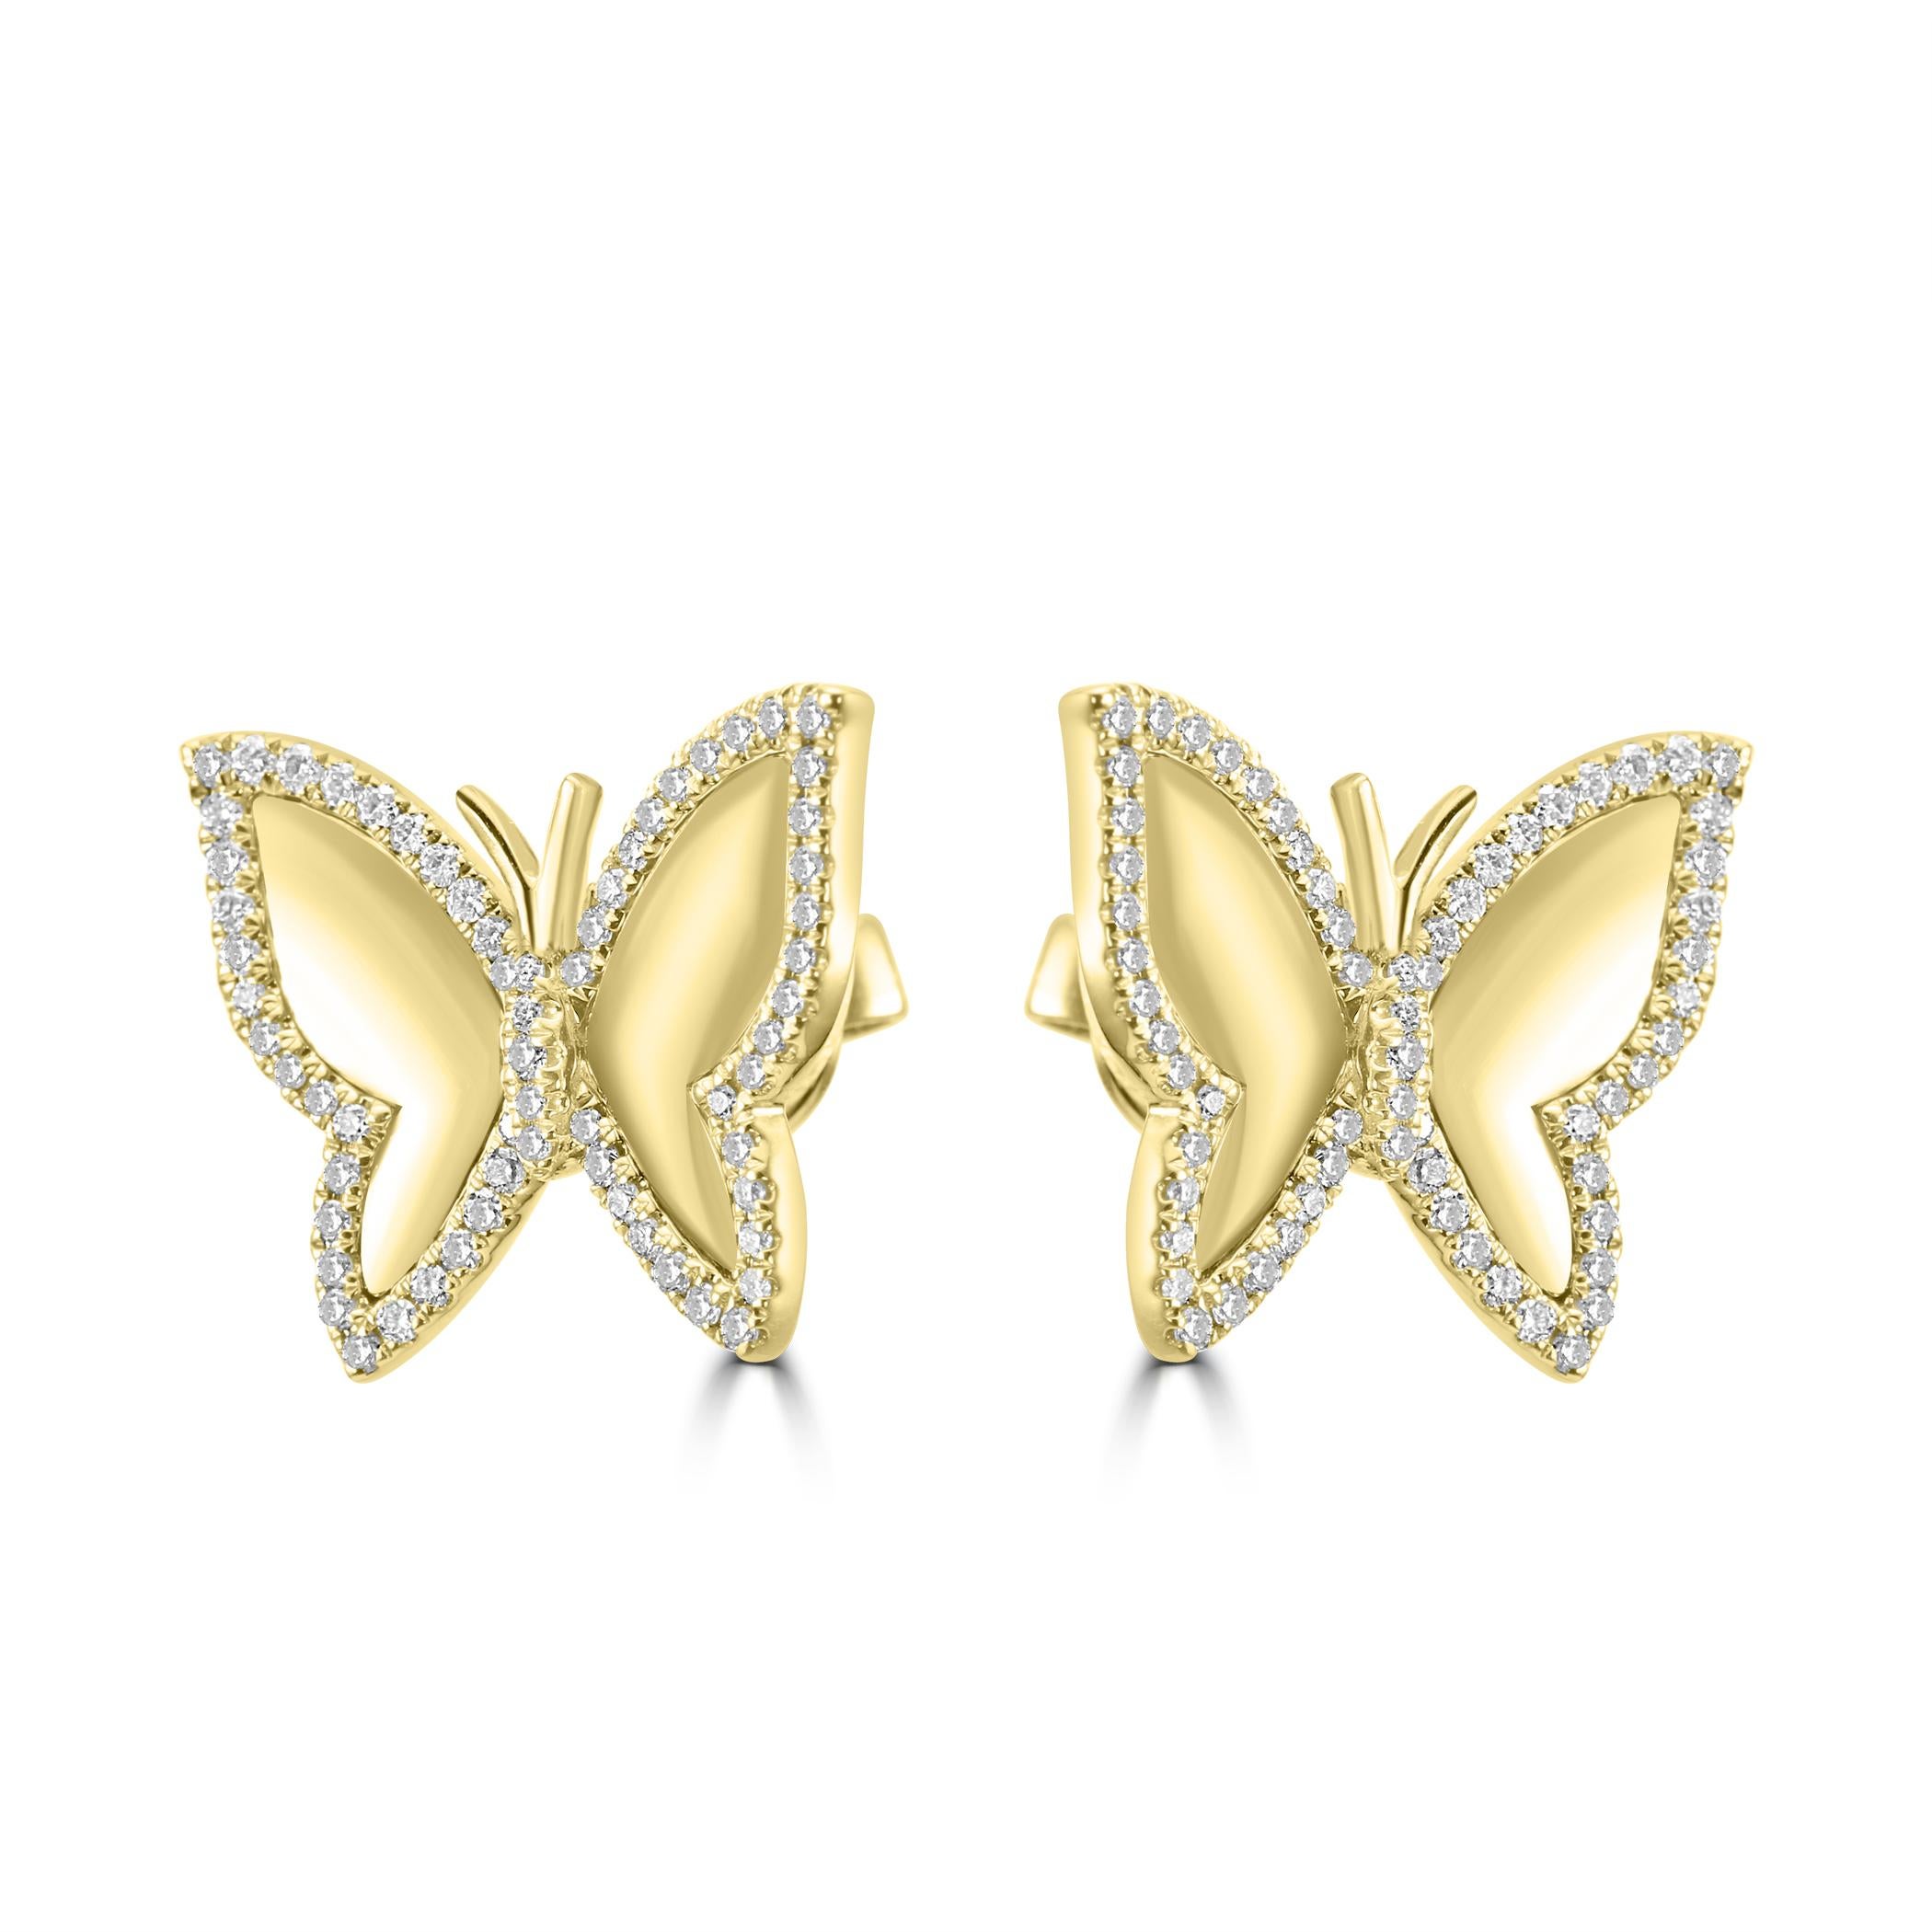 Embrace the of nature with our yellow gold butterfly-shaped earrings.

The Butterfly-Shaped Earrings are a symphony of delicate details, crafted with precision to mimic the intricate wings of a butterfly. The symmetrical design is both whimsical and